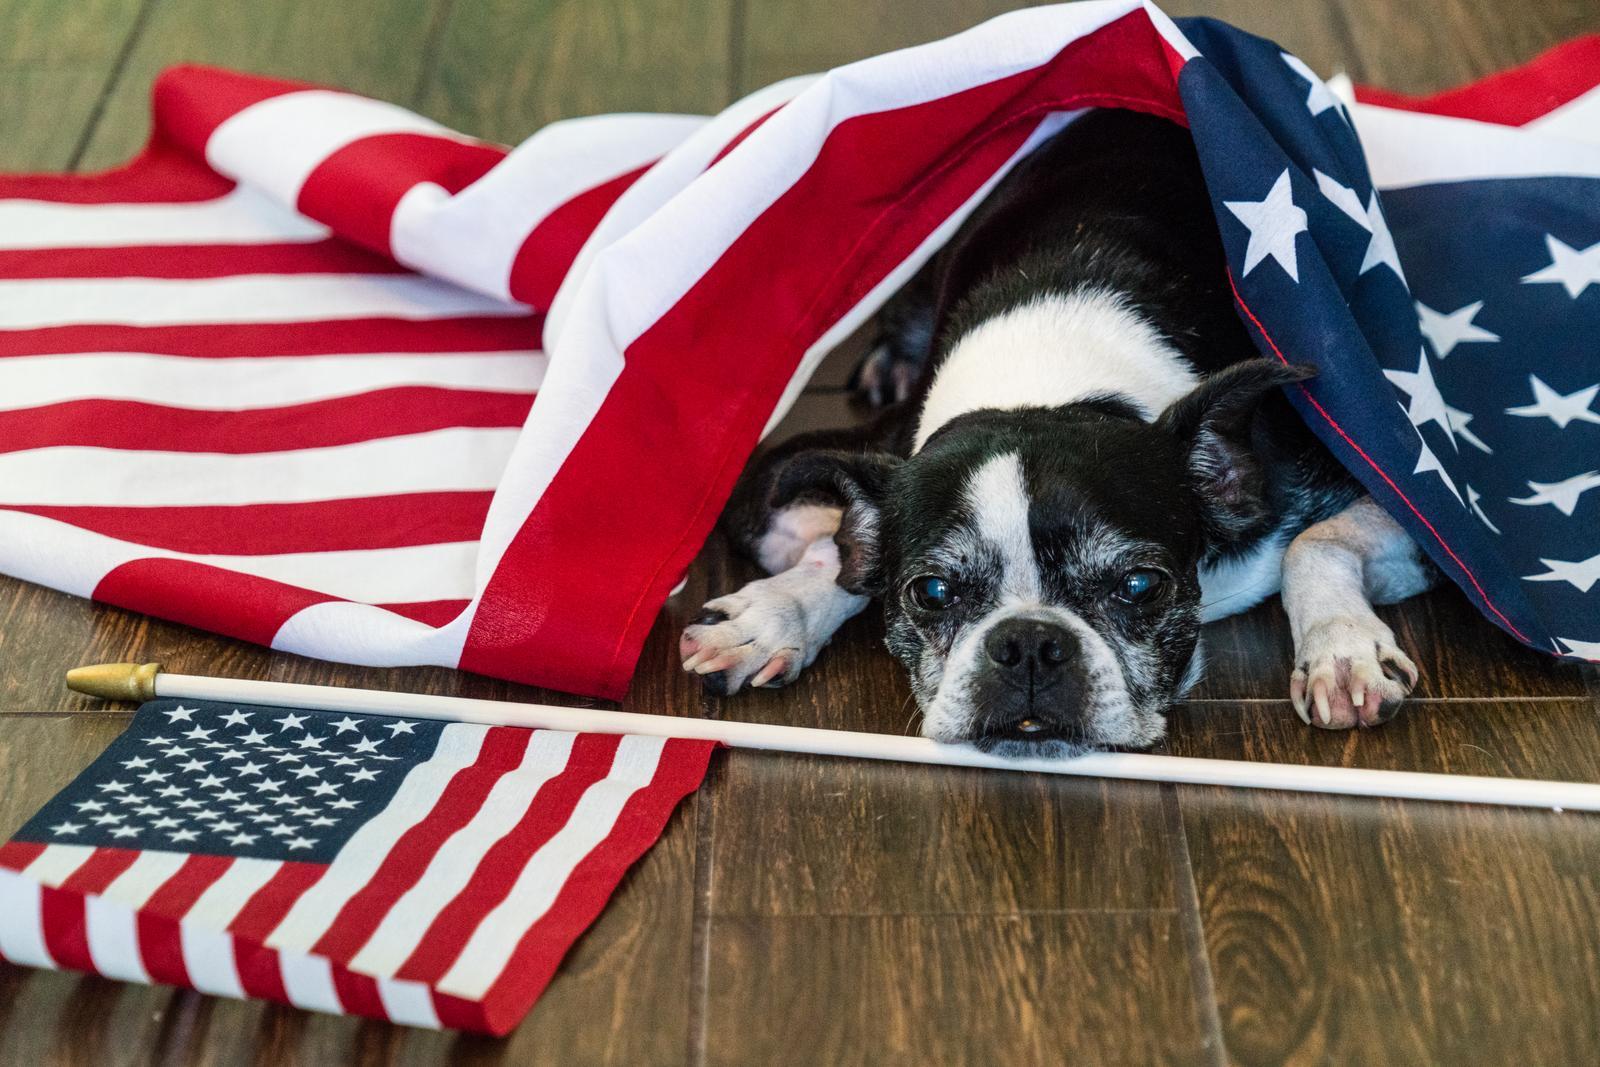 Keep Fido safe and sound on July 4th.